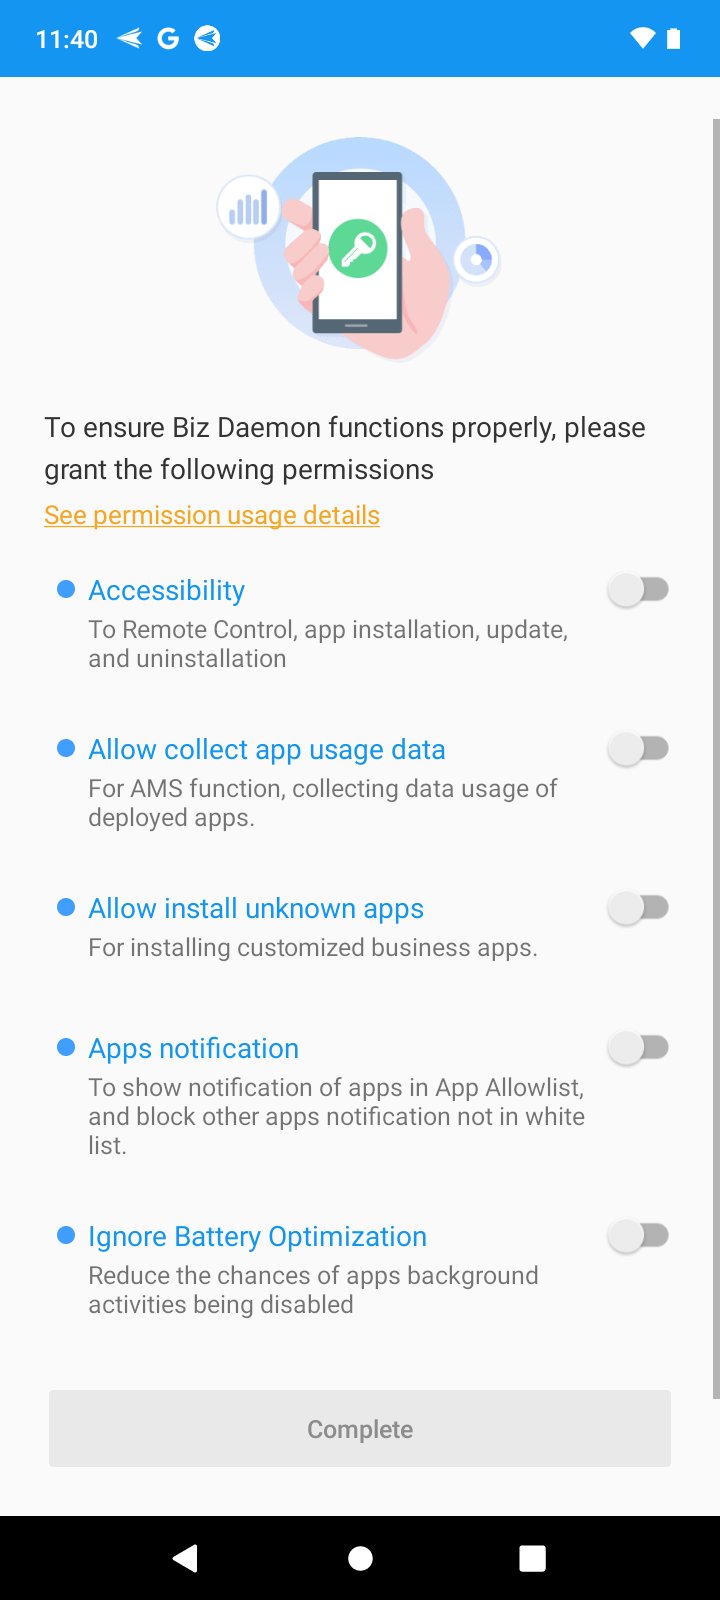 Grant-necessary-permissions-for-AirDroid-Business-Daemon